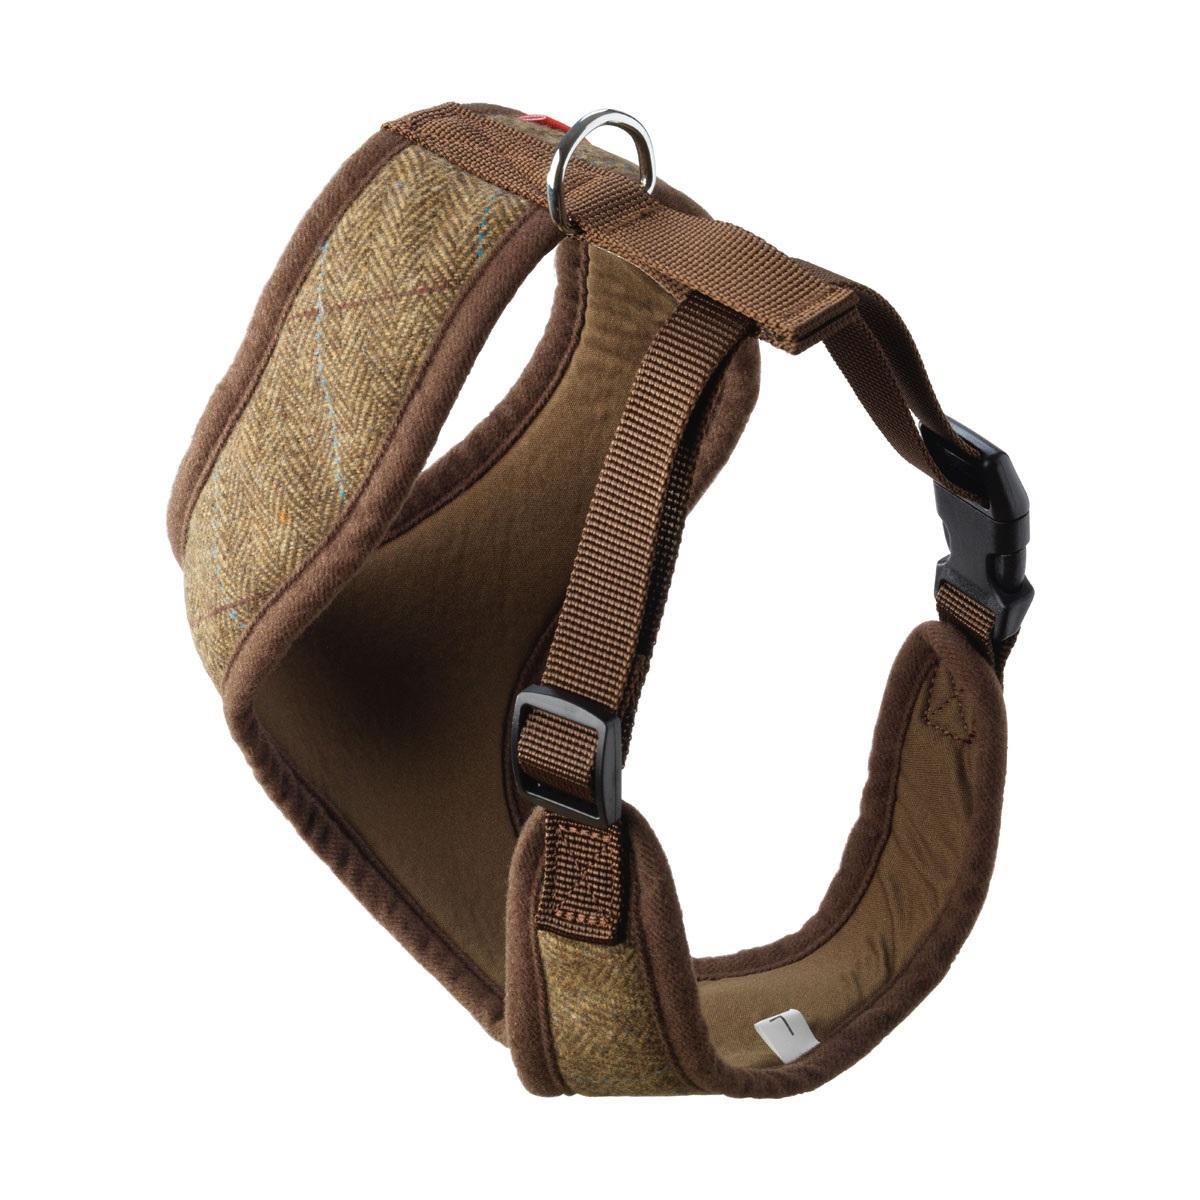 House Of Paws Memory Foam Tweed Dog Harness (Brown) (L)